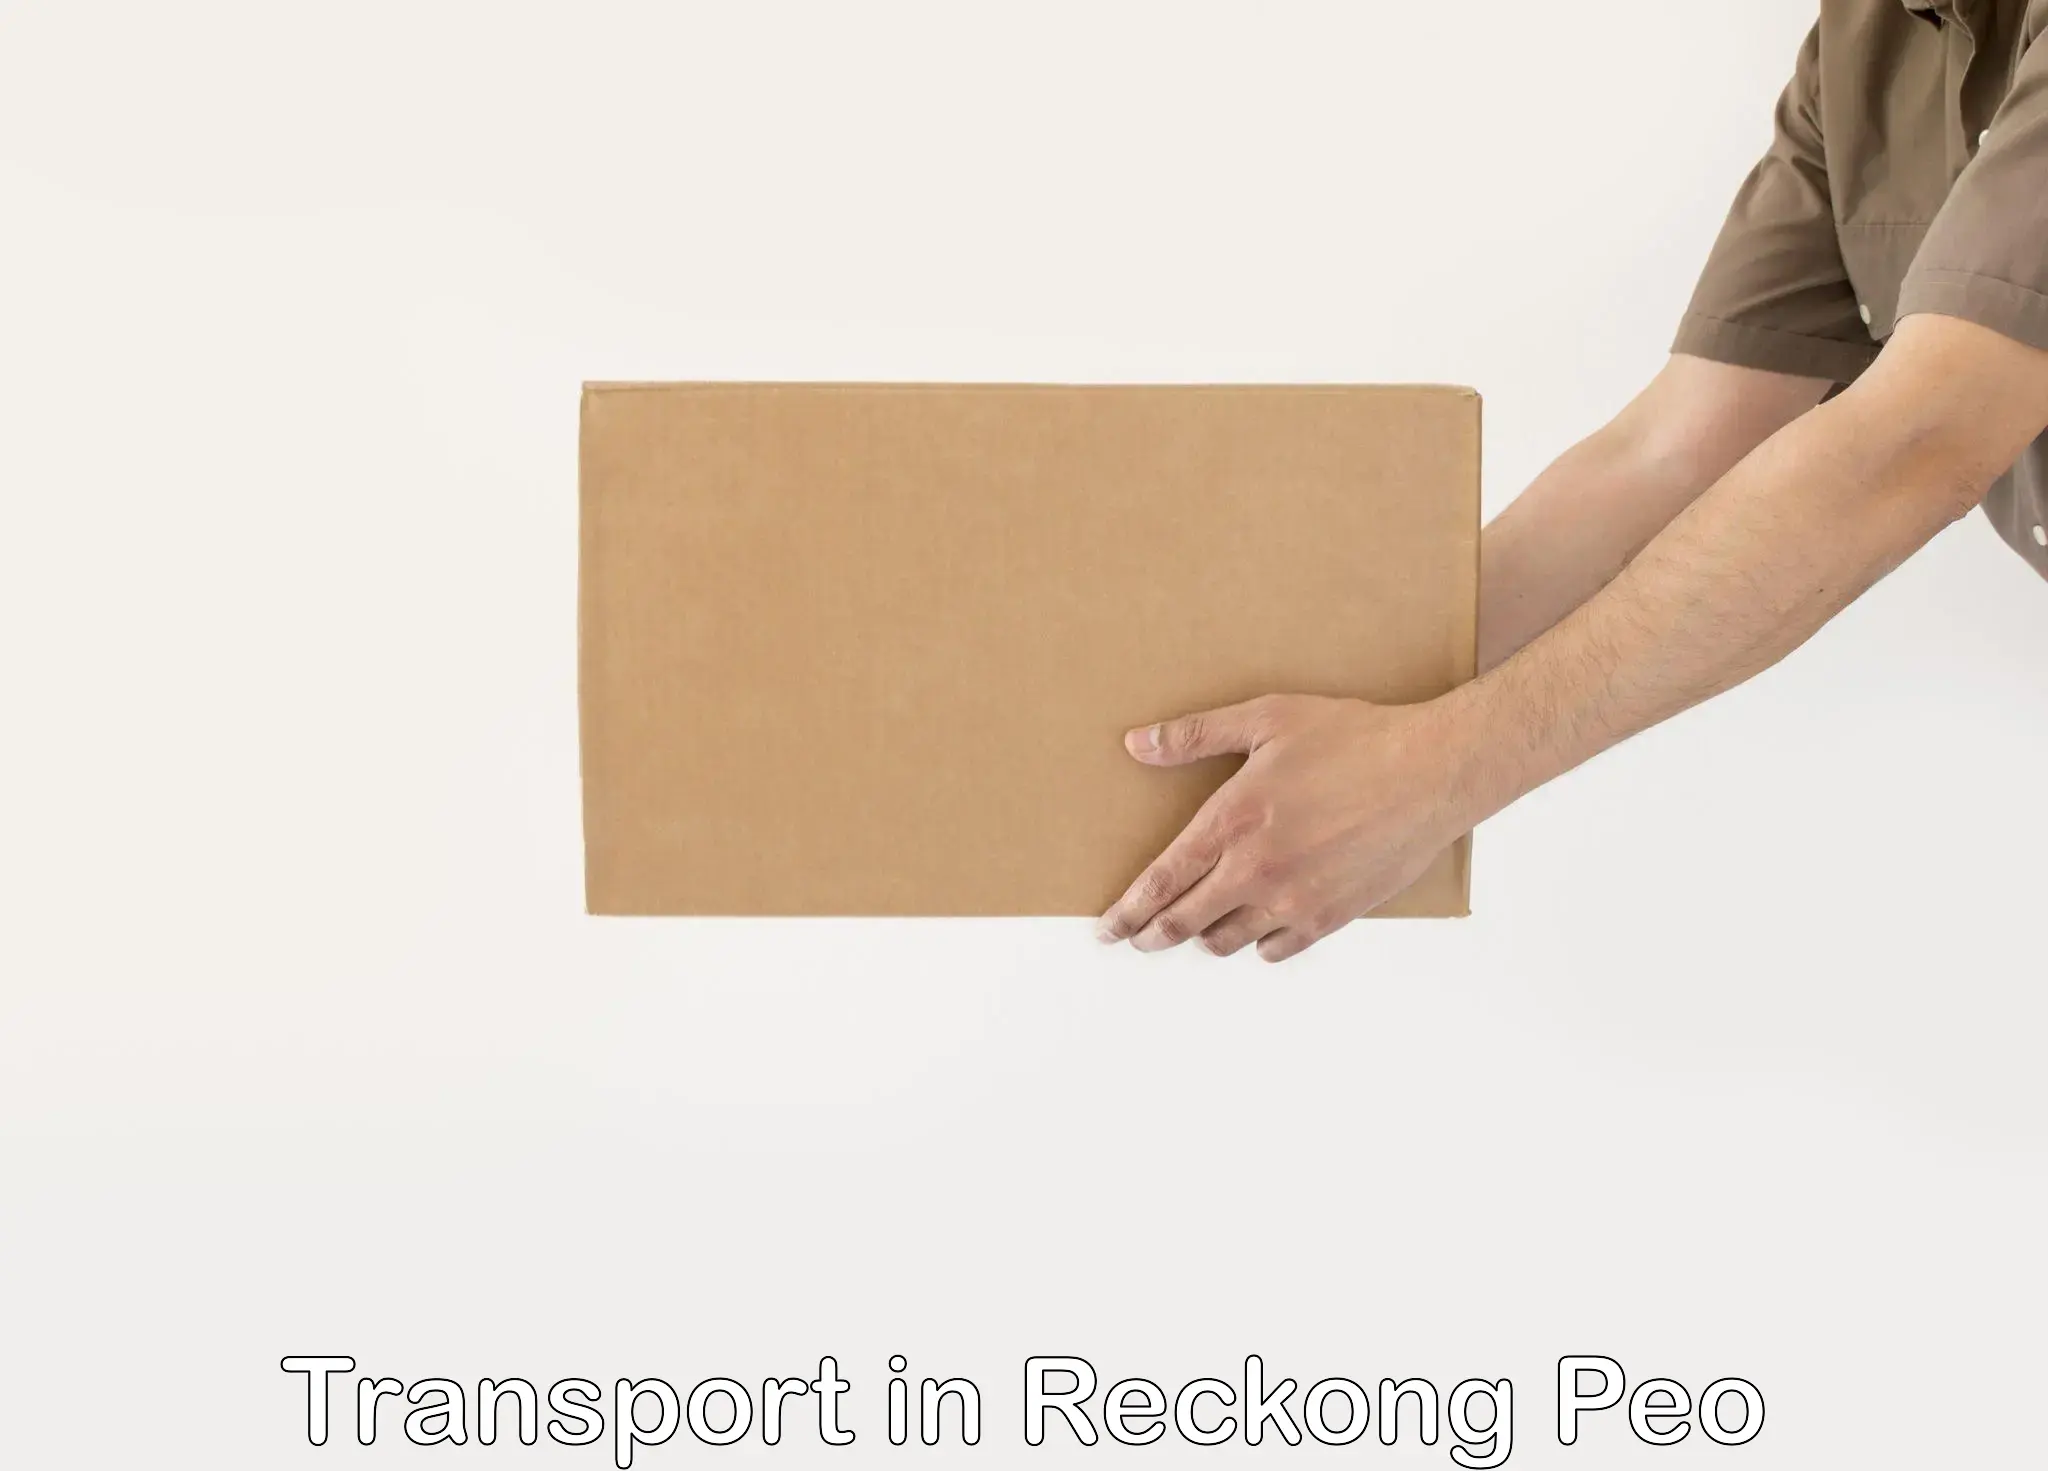 Intercity goods transport in Reckong Peo